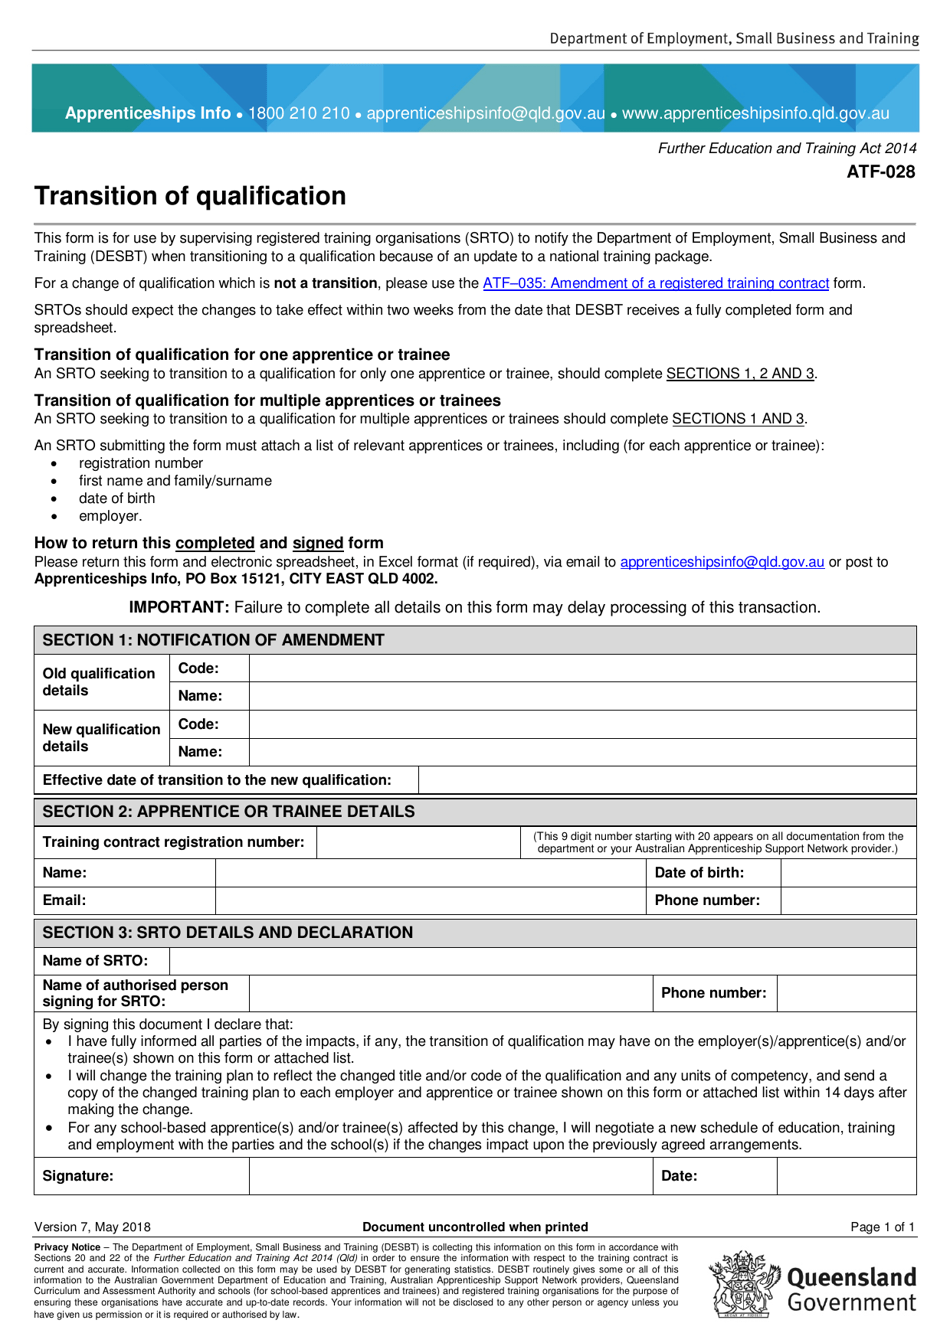 Form ATF-028 Transition of Qualification - Queensland, Australia, Page 1